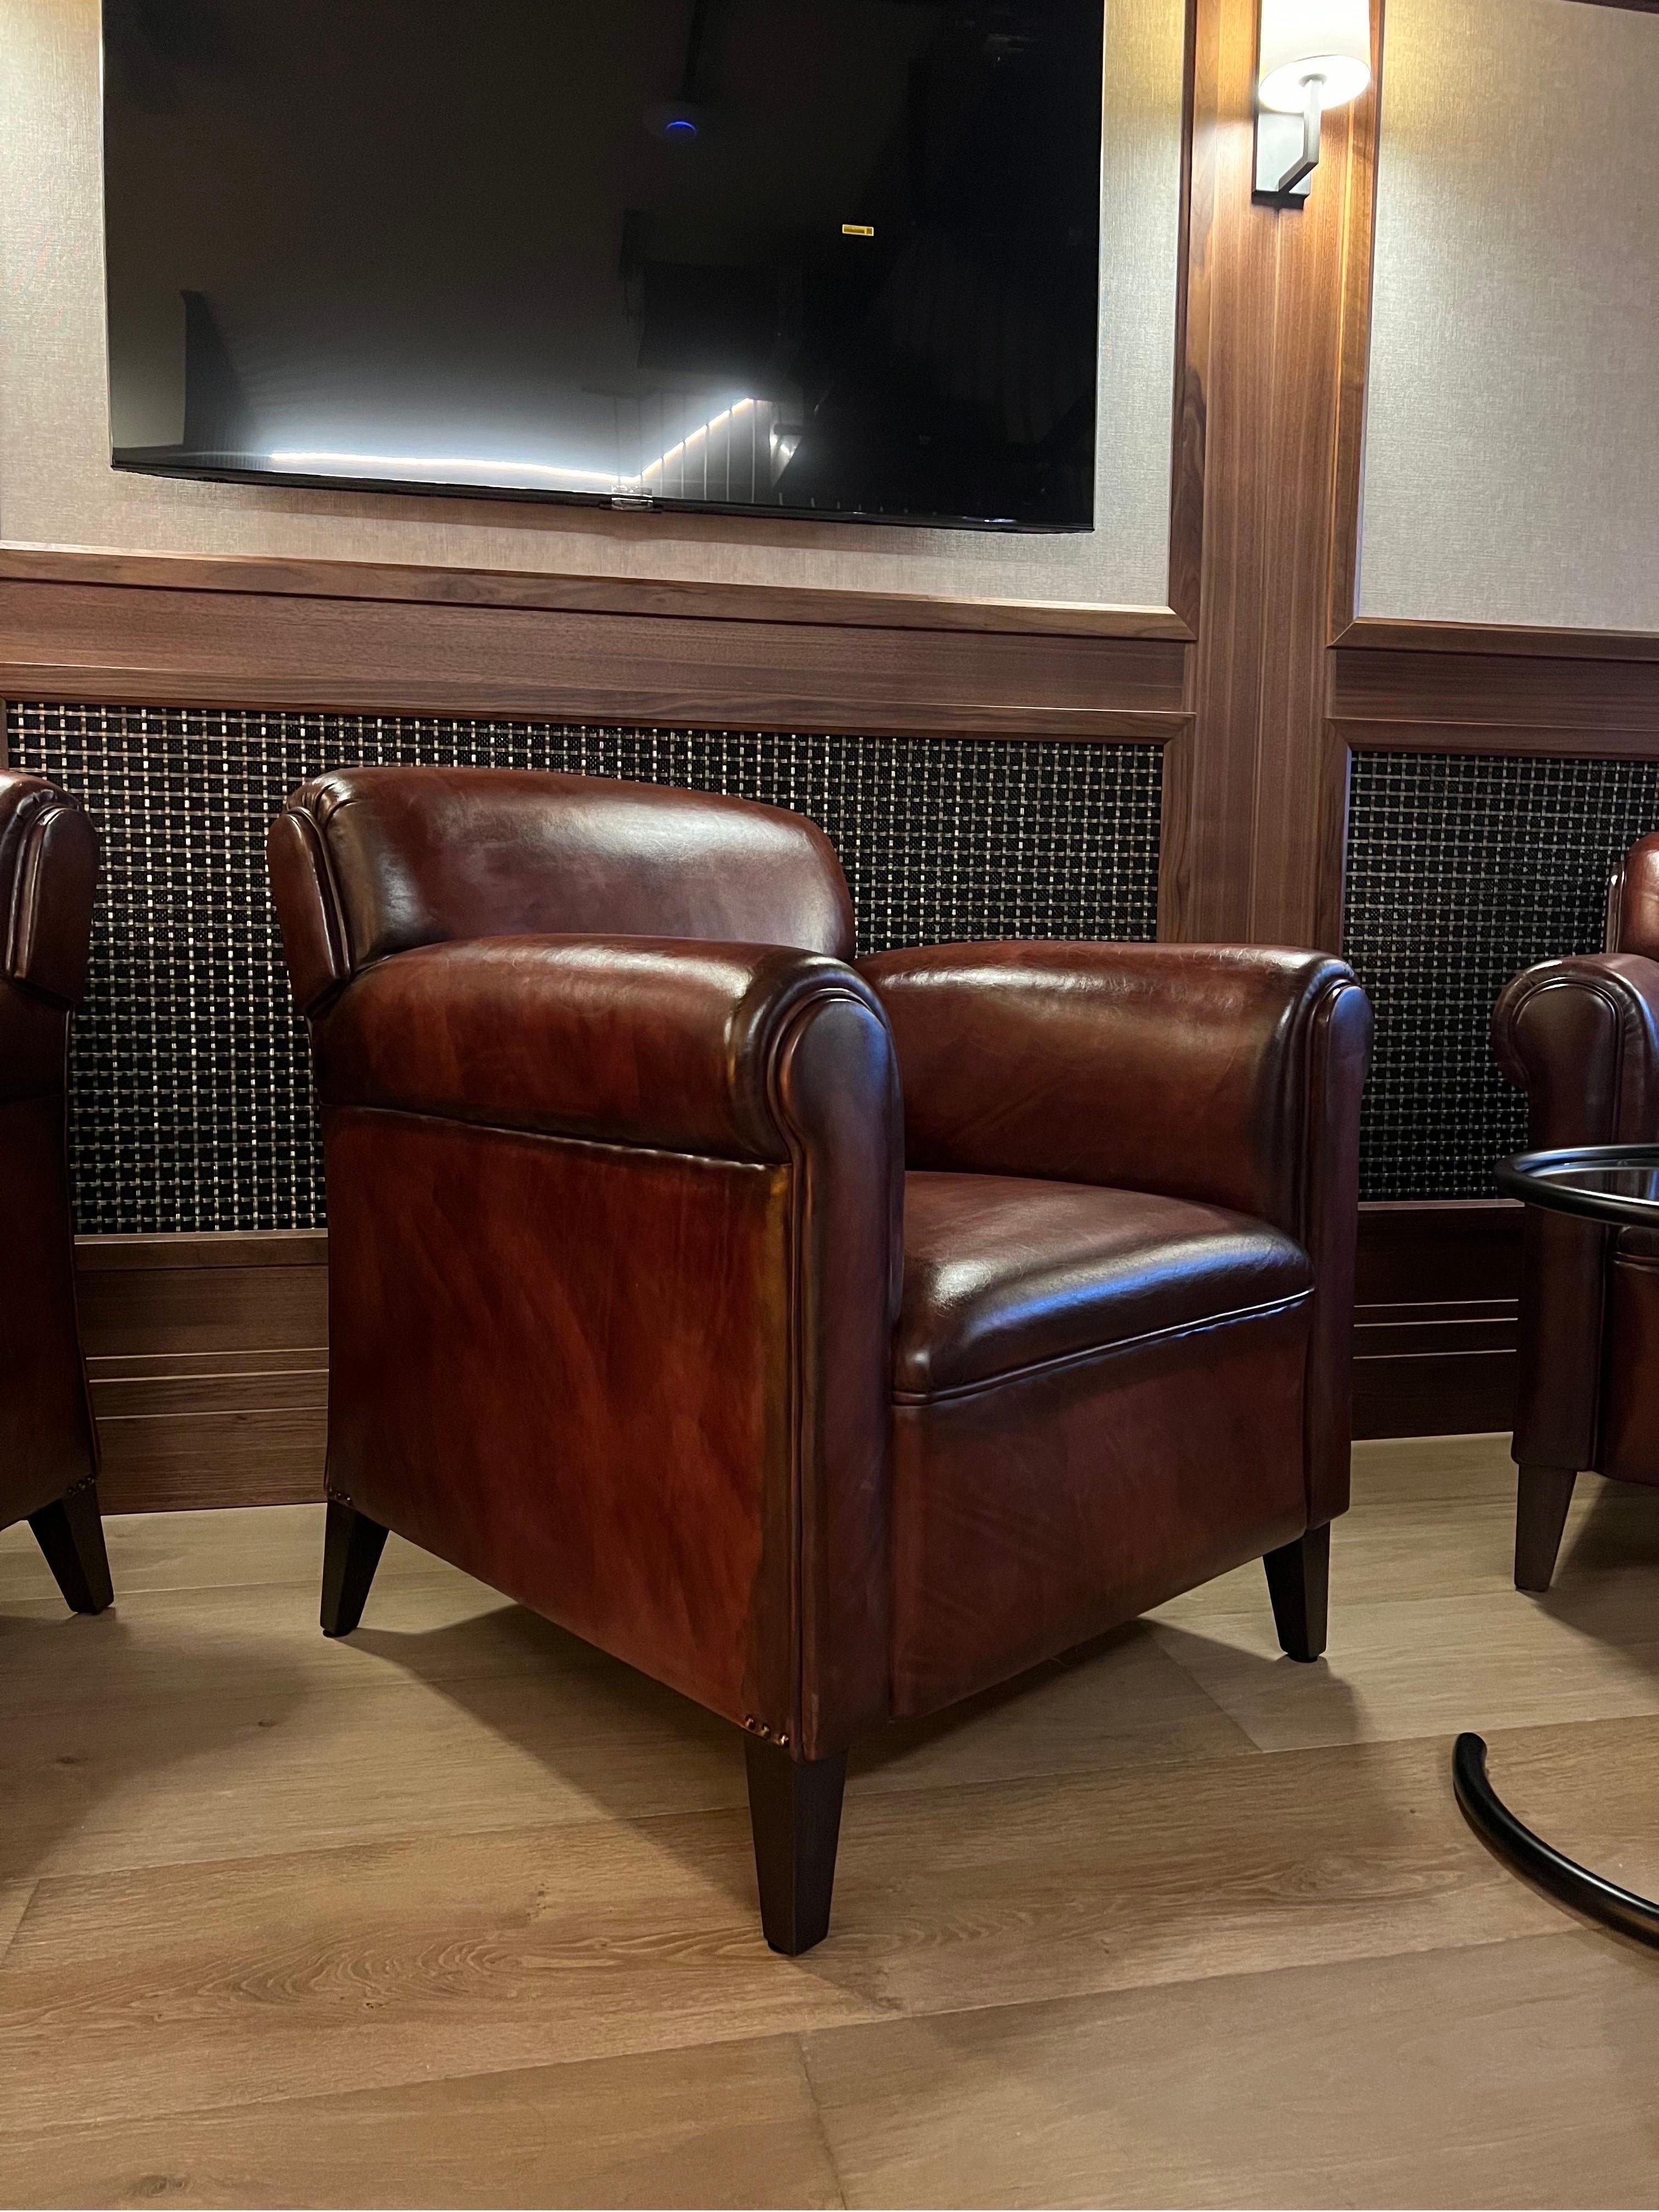 Our Edward Cigar chair is built with comfort and gentlemanly elegance in mind.  It encapsulates the essence of the modern discerning gentleman. 

Here you can see it finishes in our hand dyed Tobacco with a lovely patina which outlines the pieces